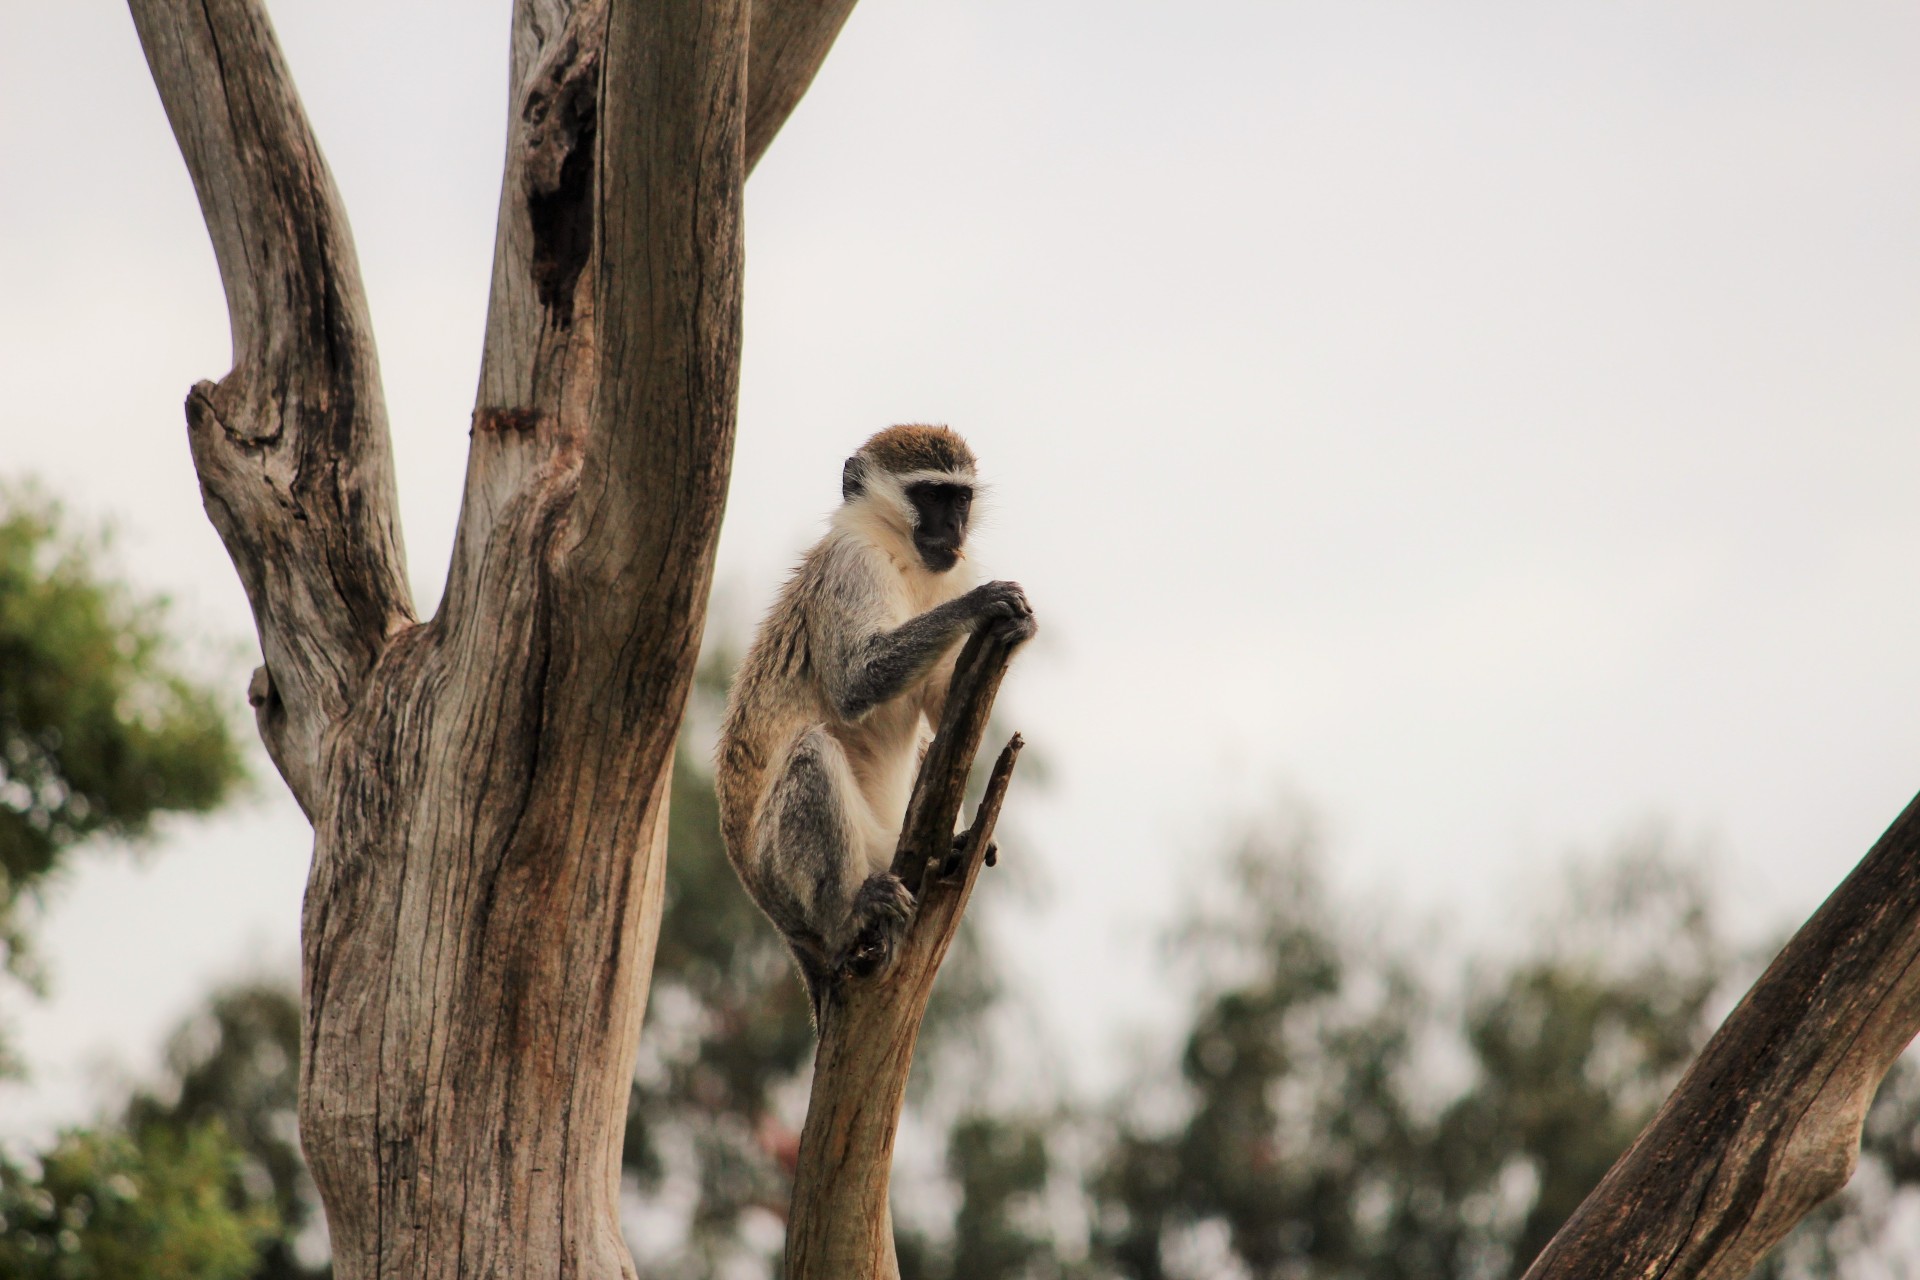 A vervet sitting high up in the branches of a tree